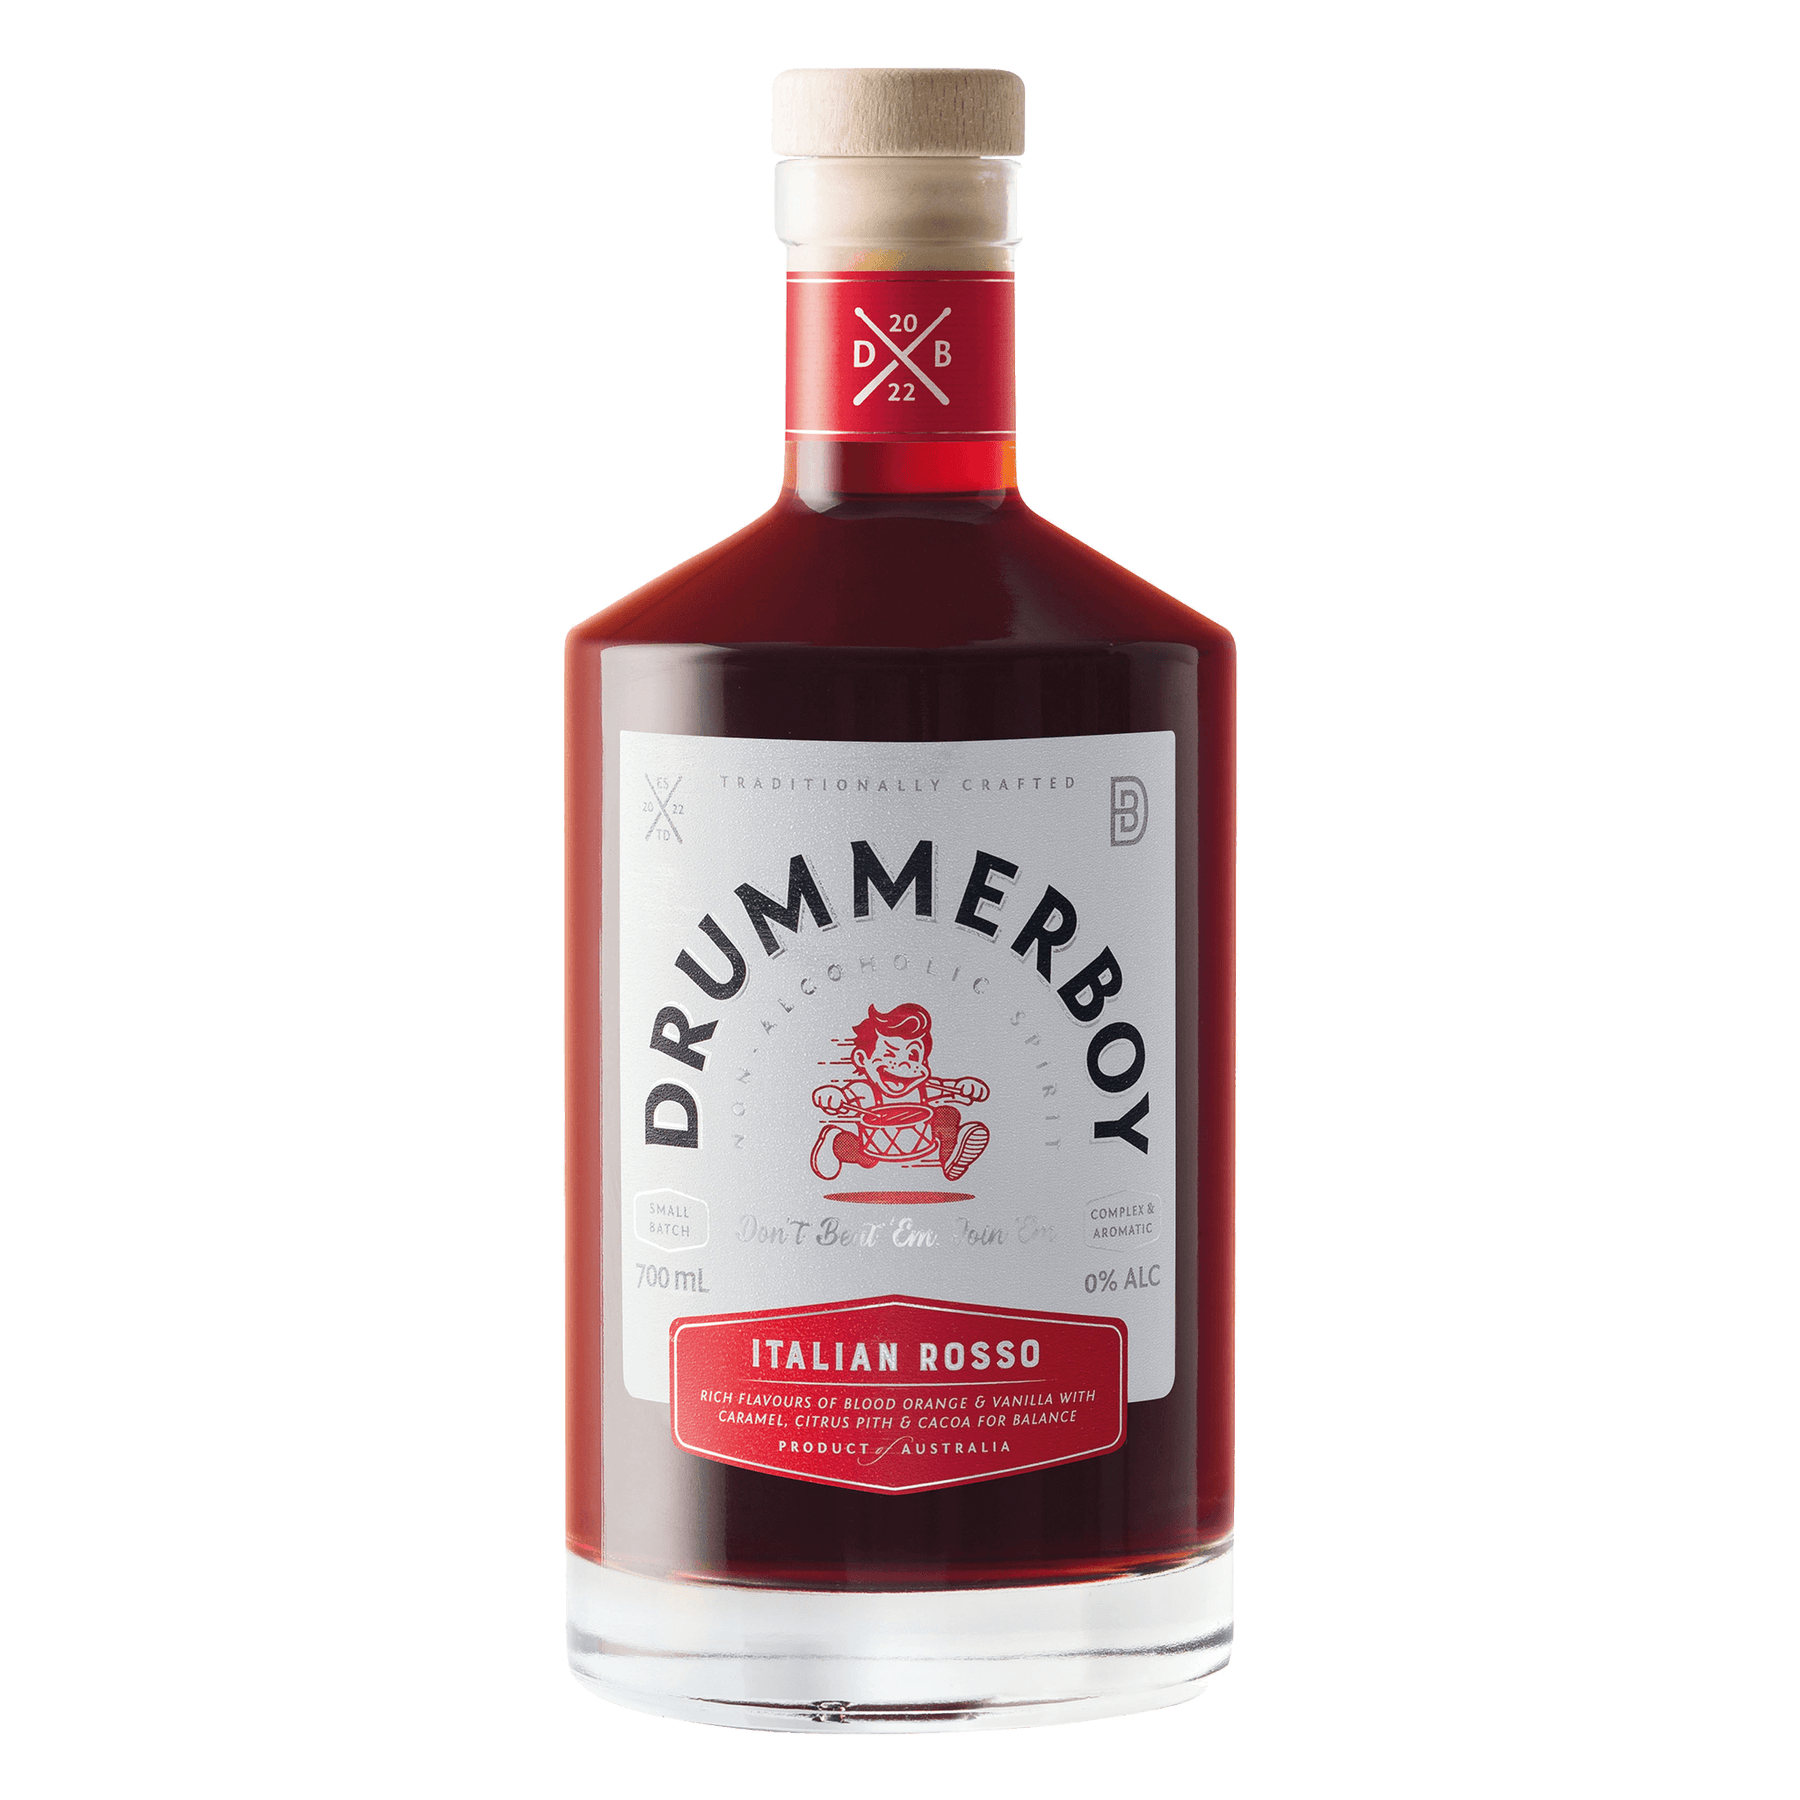 Drummerboy Italian Rosso Non Alcoholic Sweet Vermouth